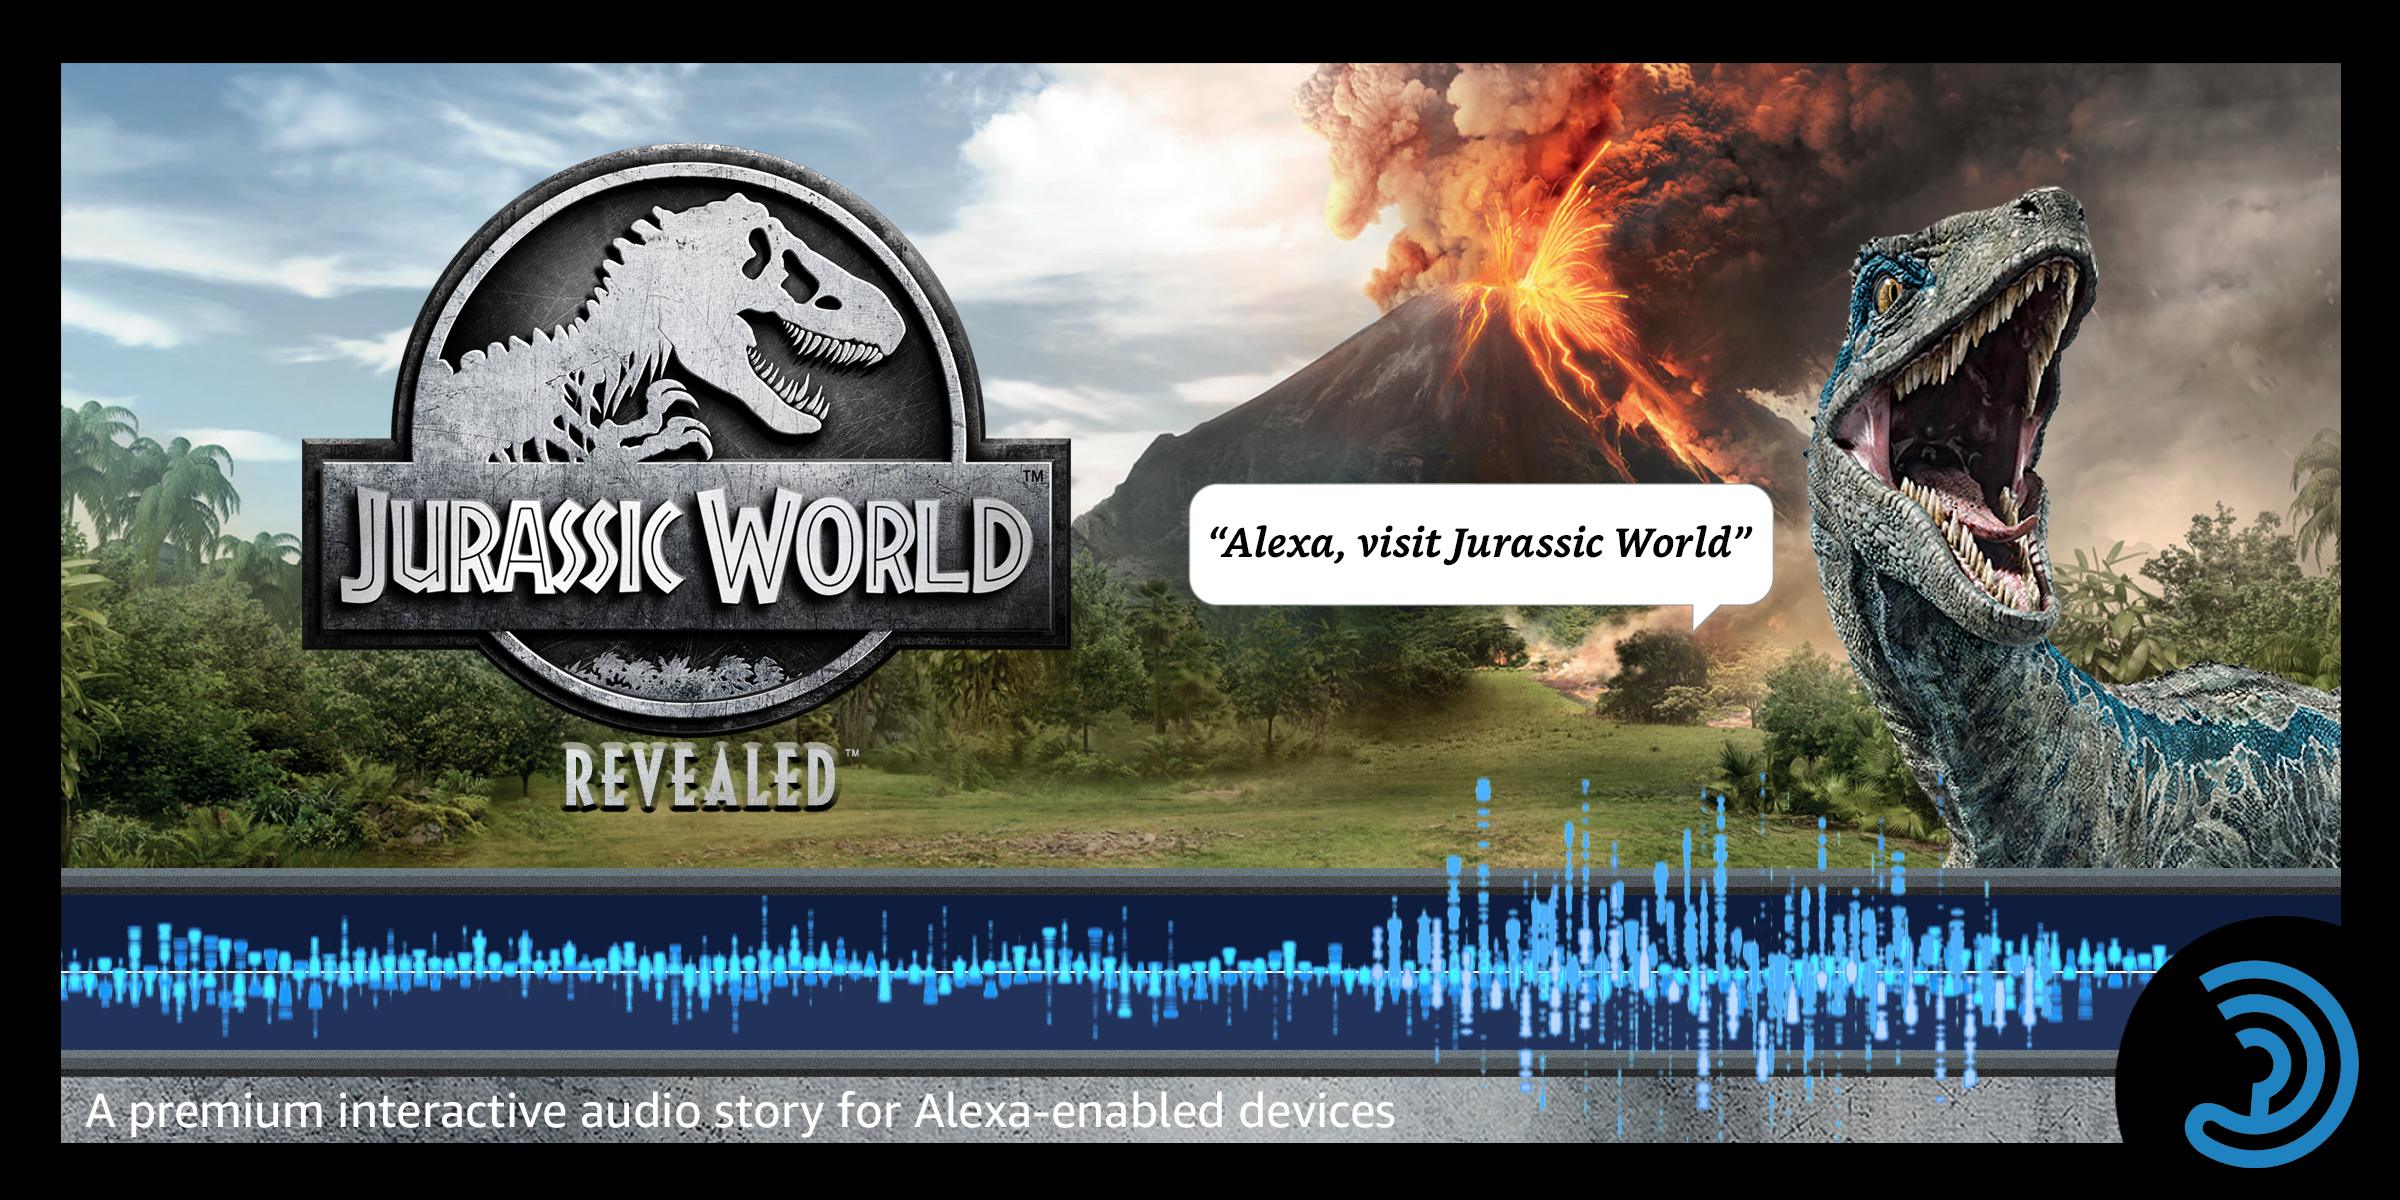 'jurassic world revealed' exposes the limits of alexa games